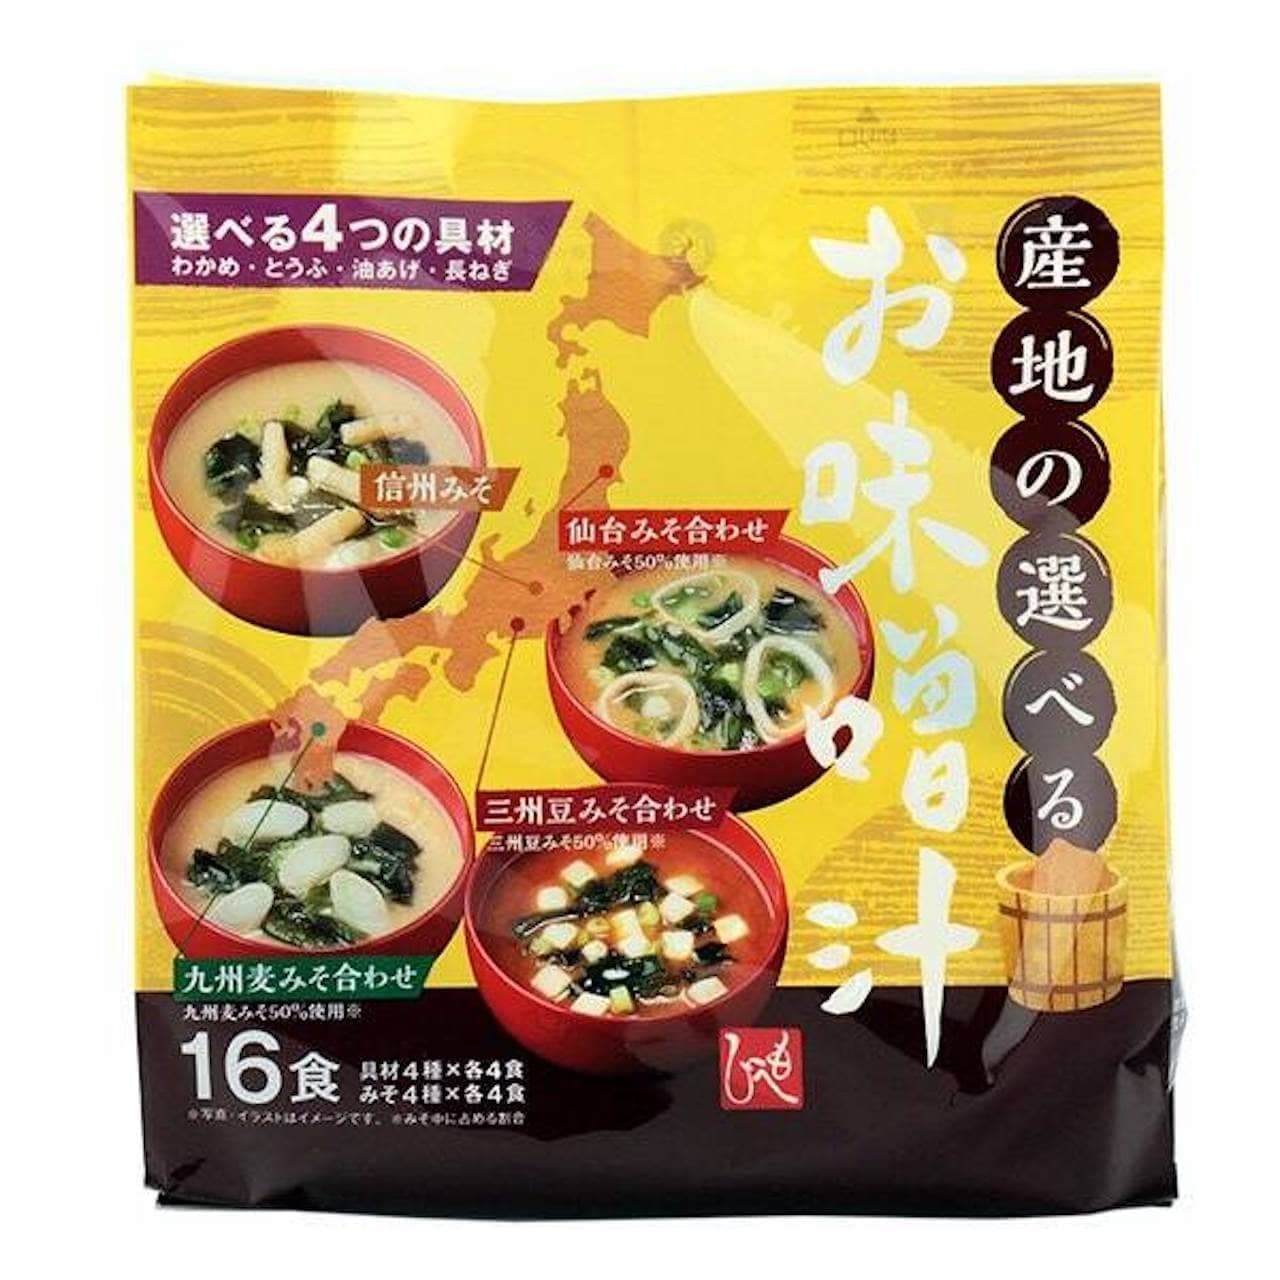 KALDI "16 servings of miso soup with choice of region